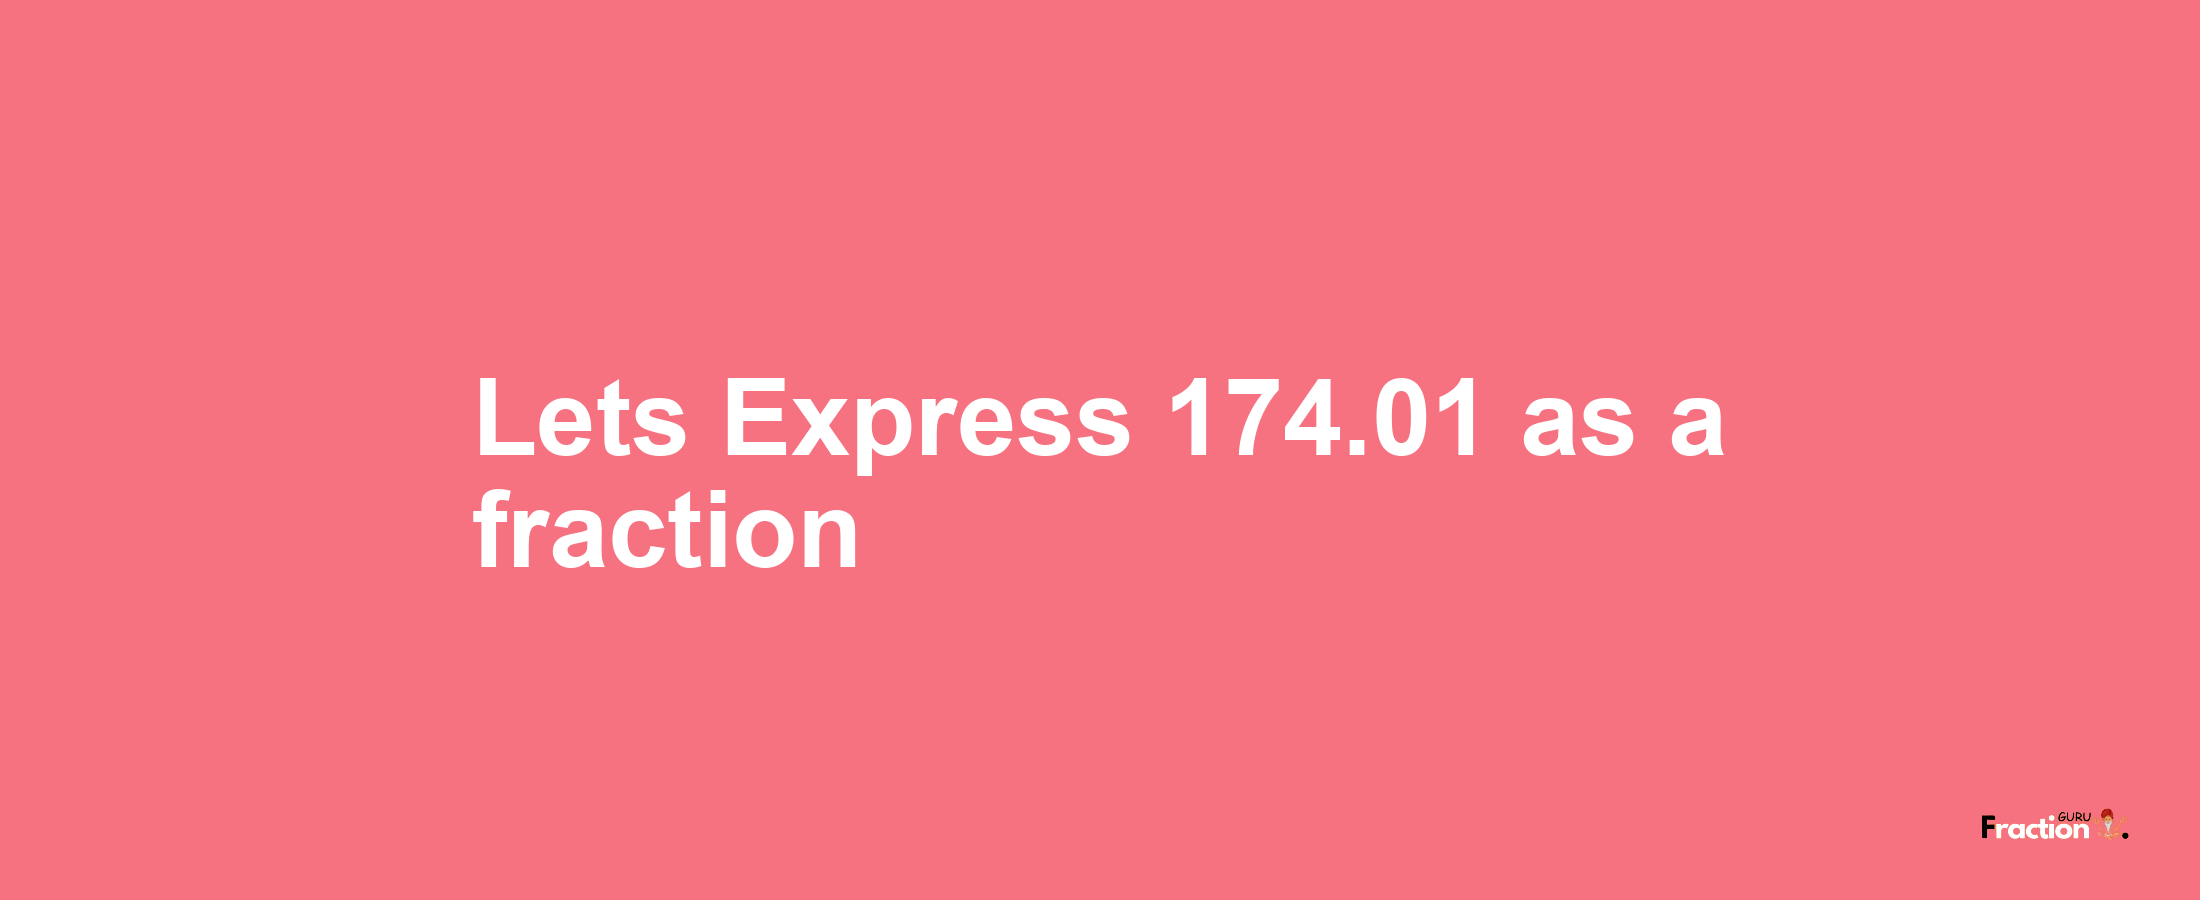 Lets Express 174.01 as afraction